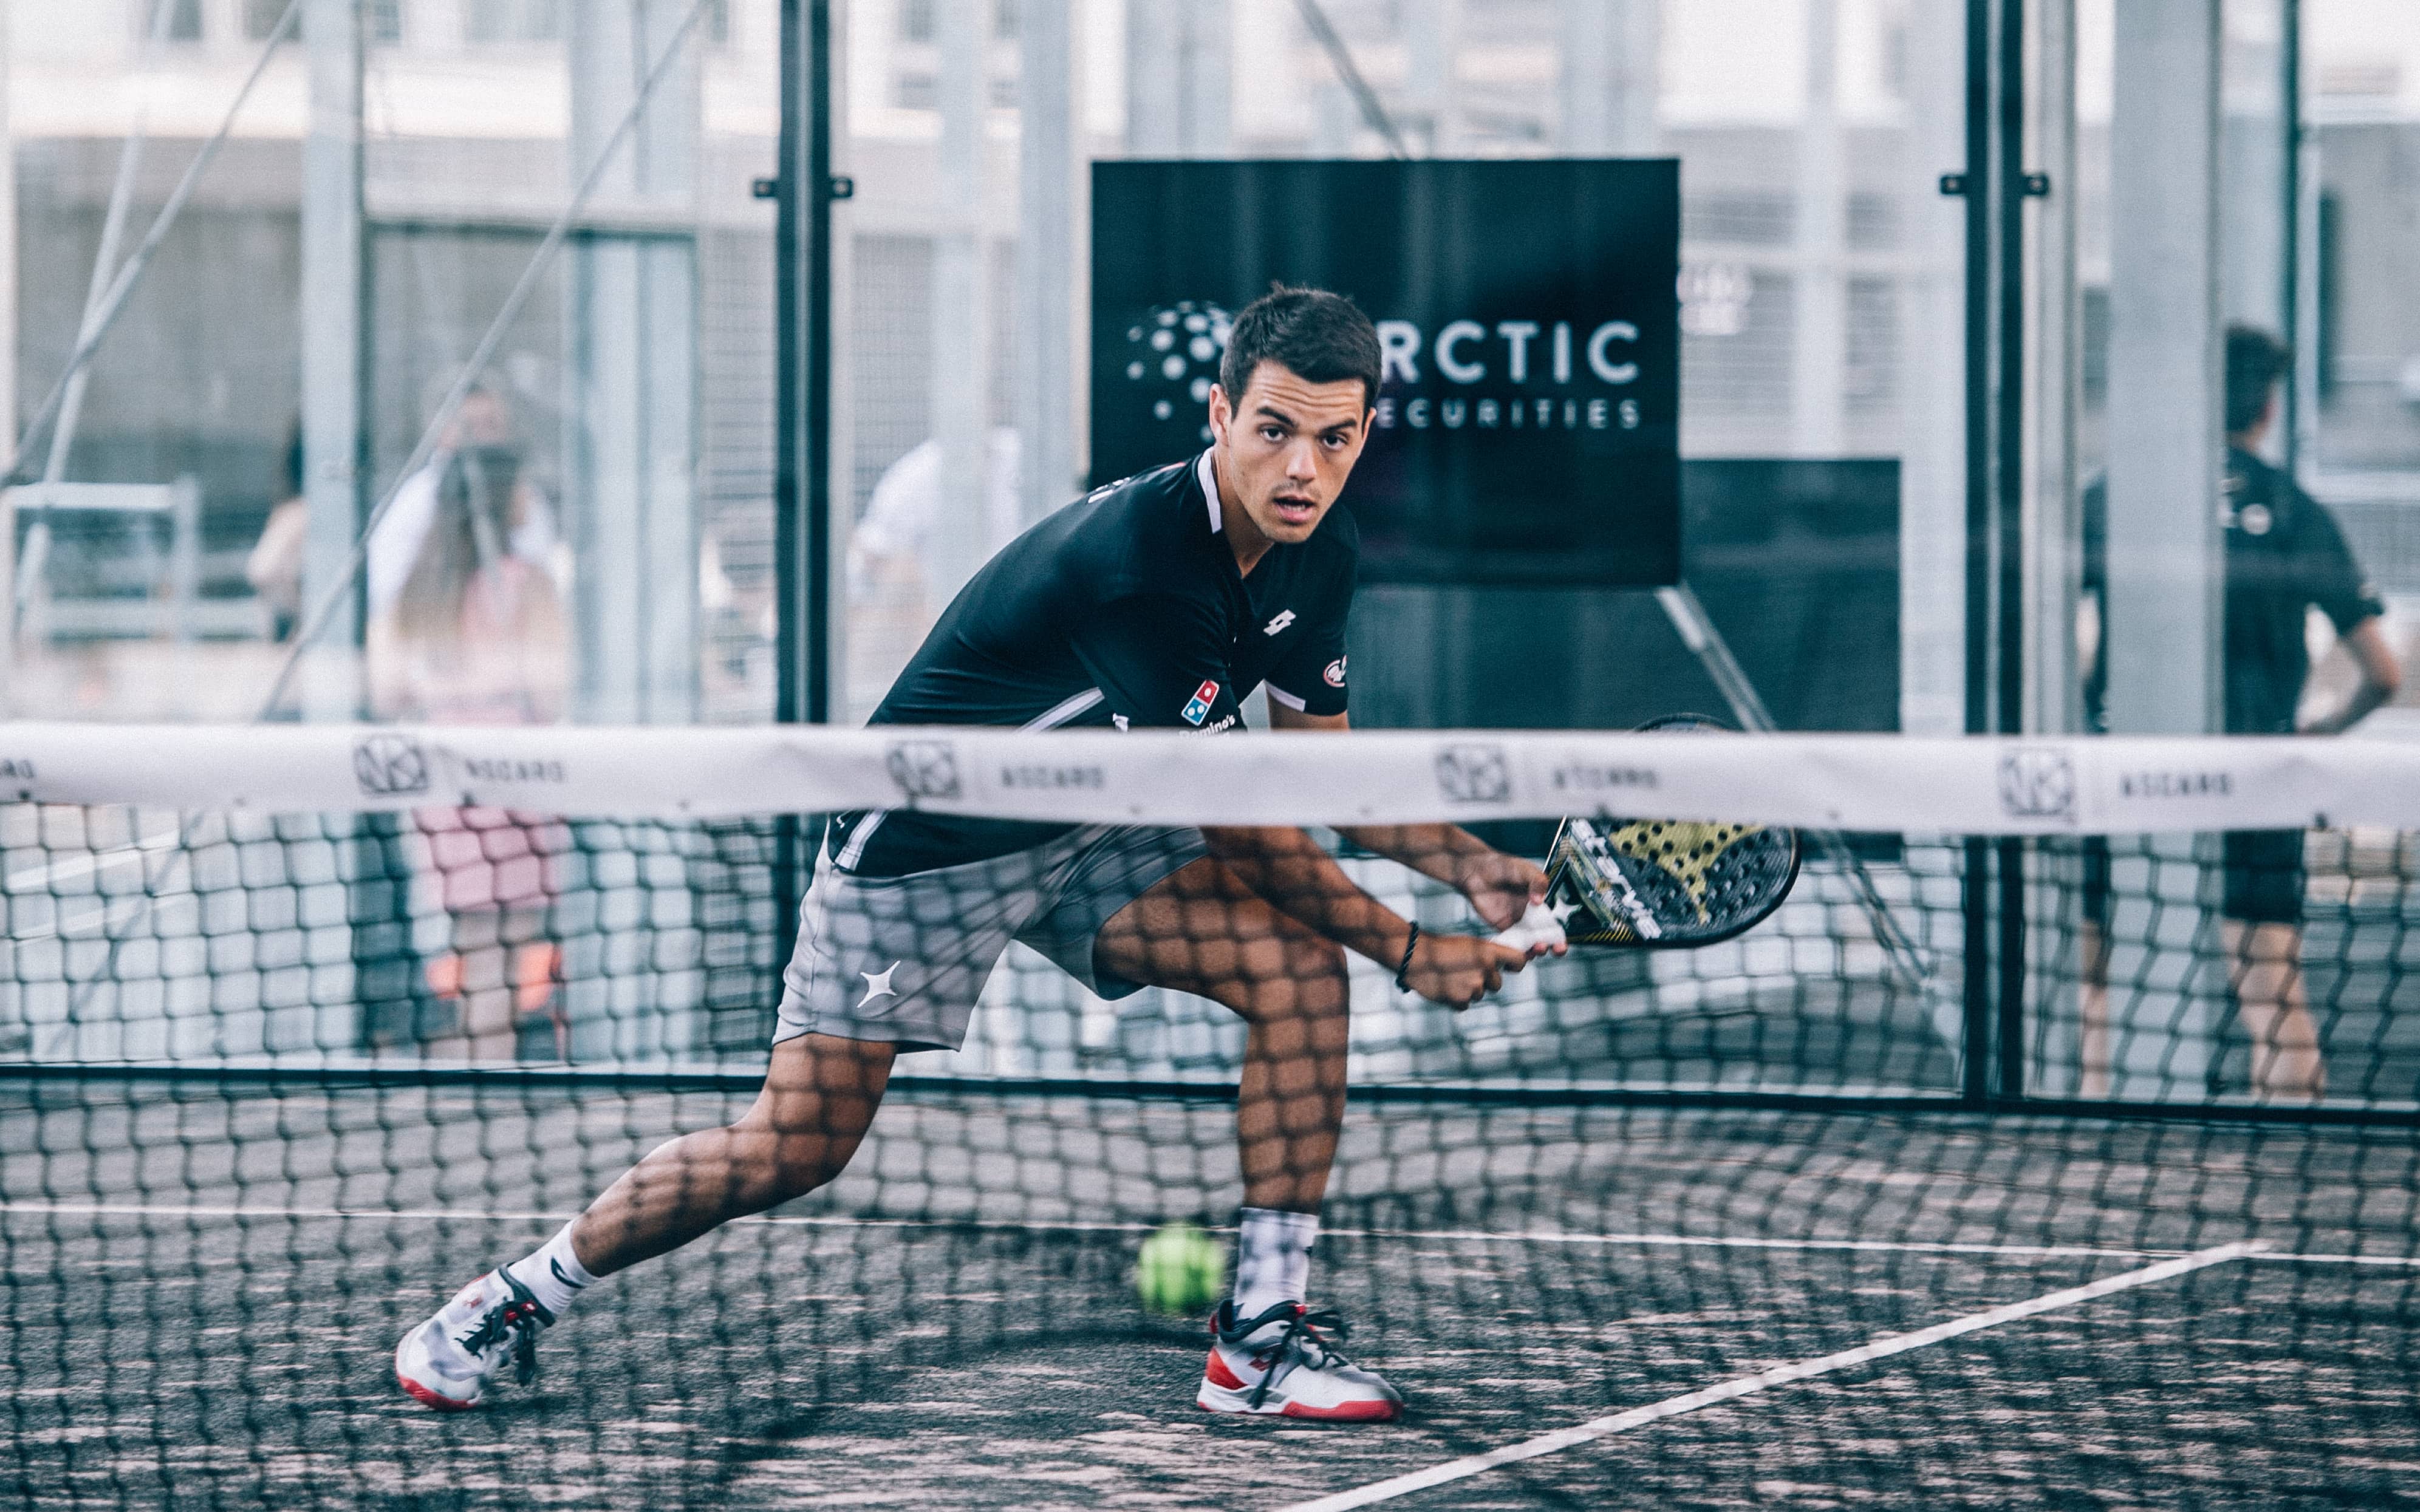 Has padel become the choice sport in Sweden